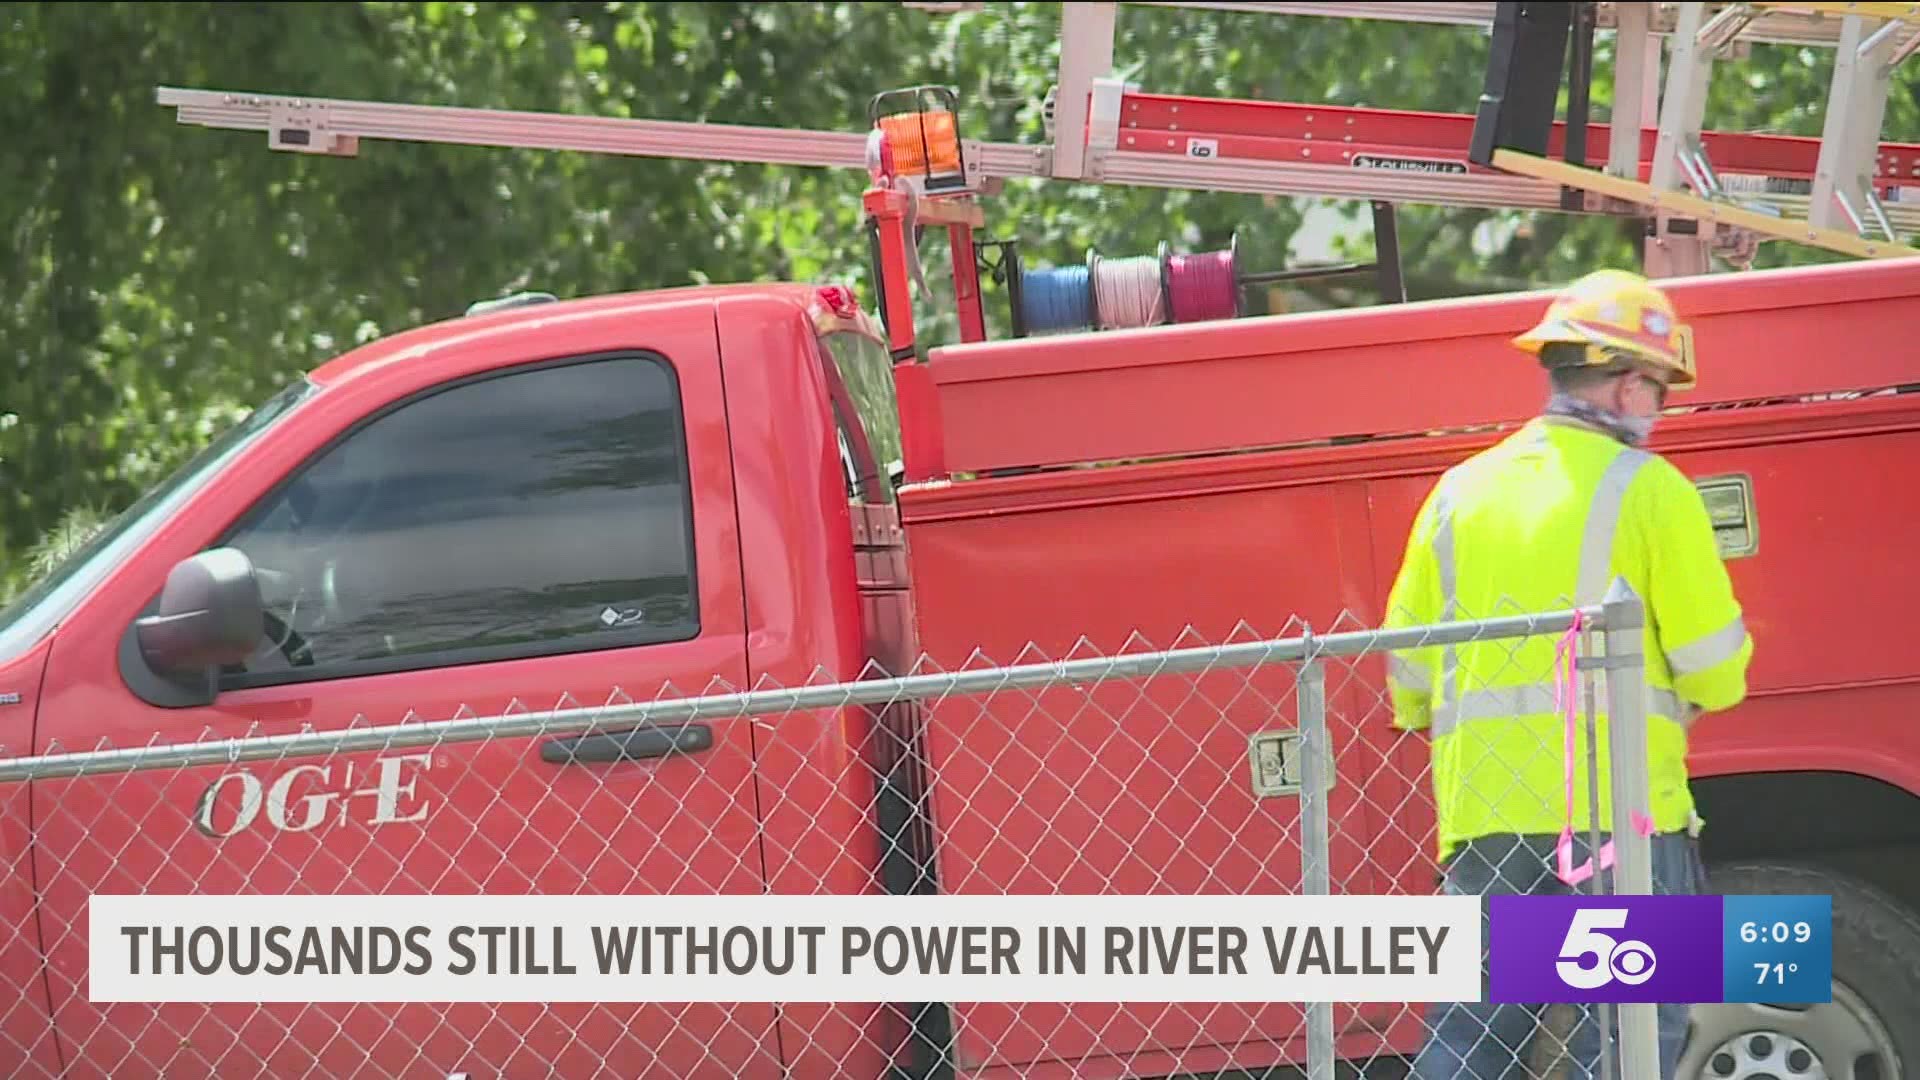 OG&E crews are still working to restore power to thousands in the River Valley following Monday night's severe storms.